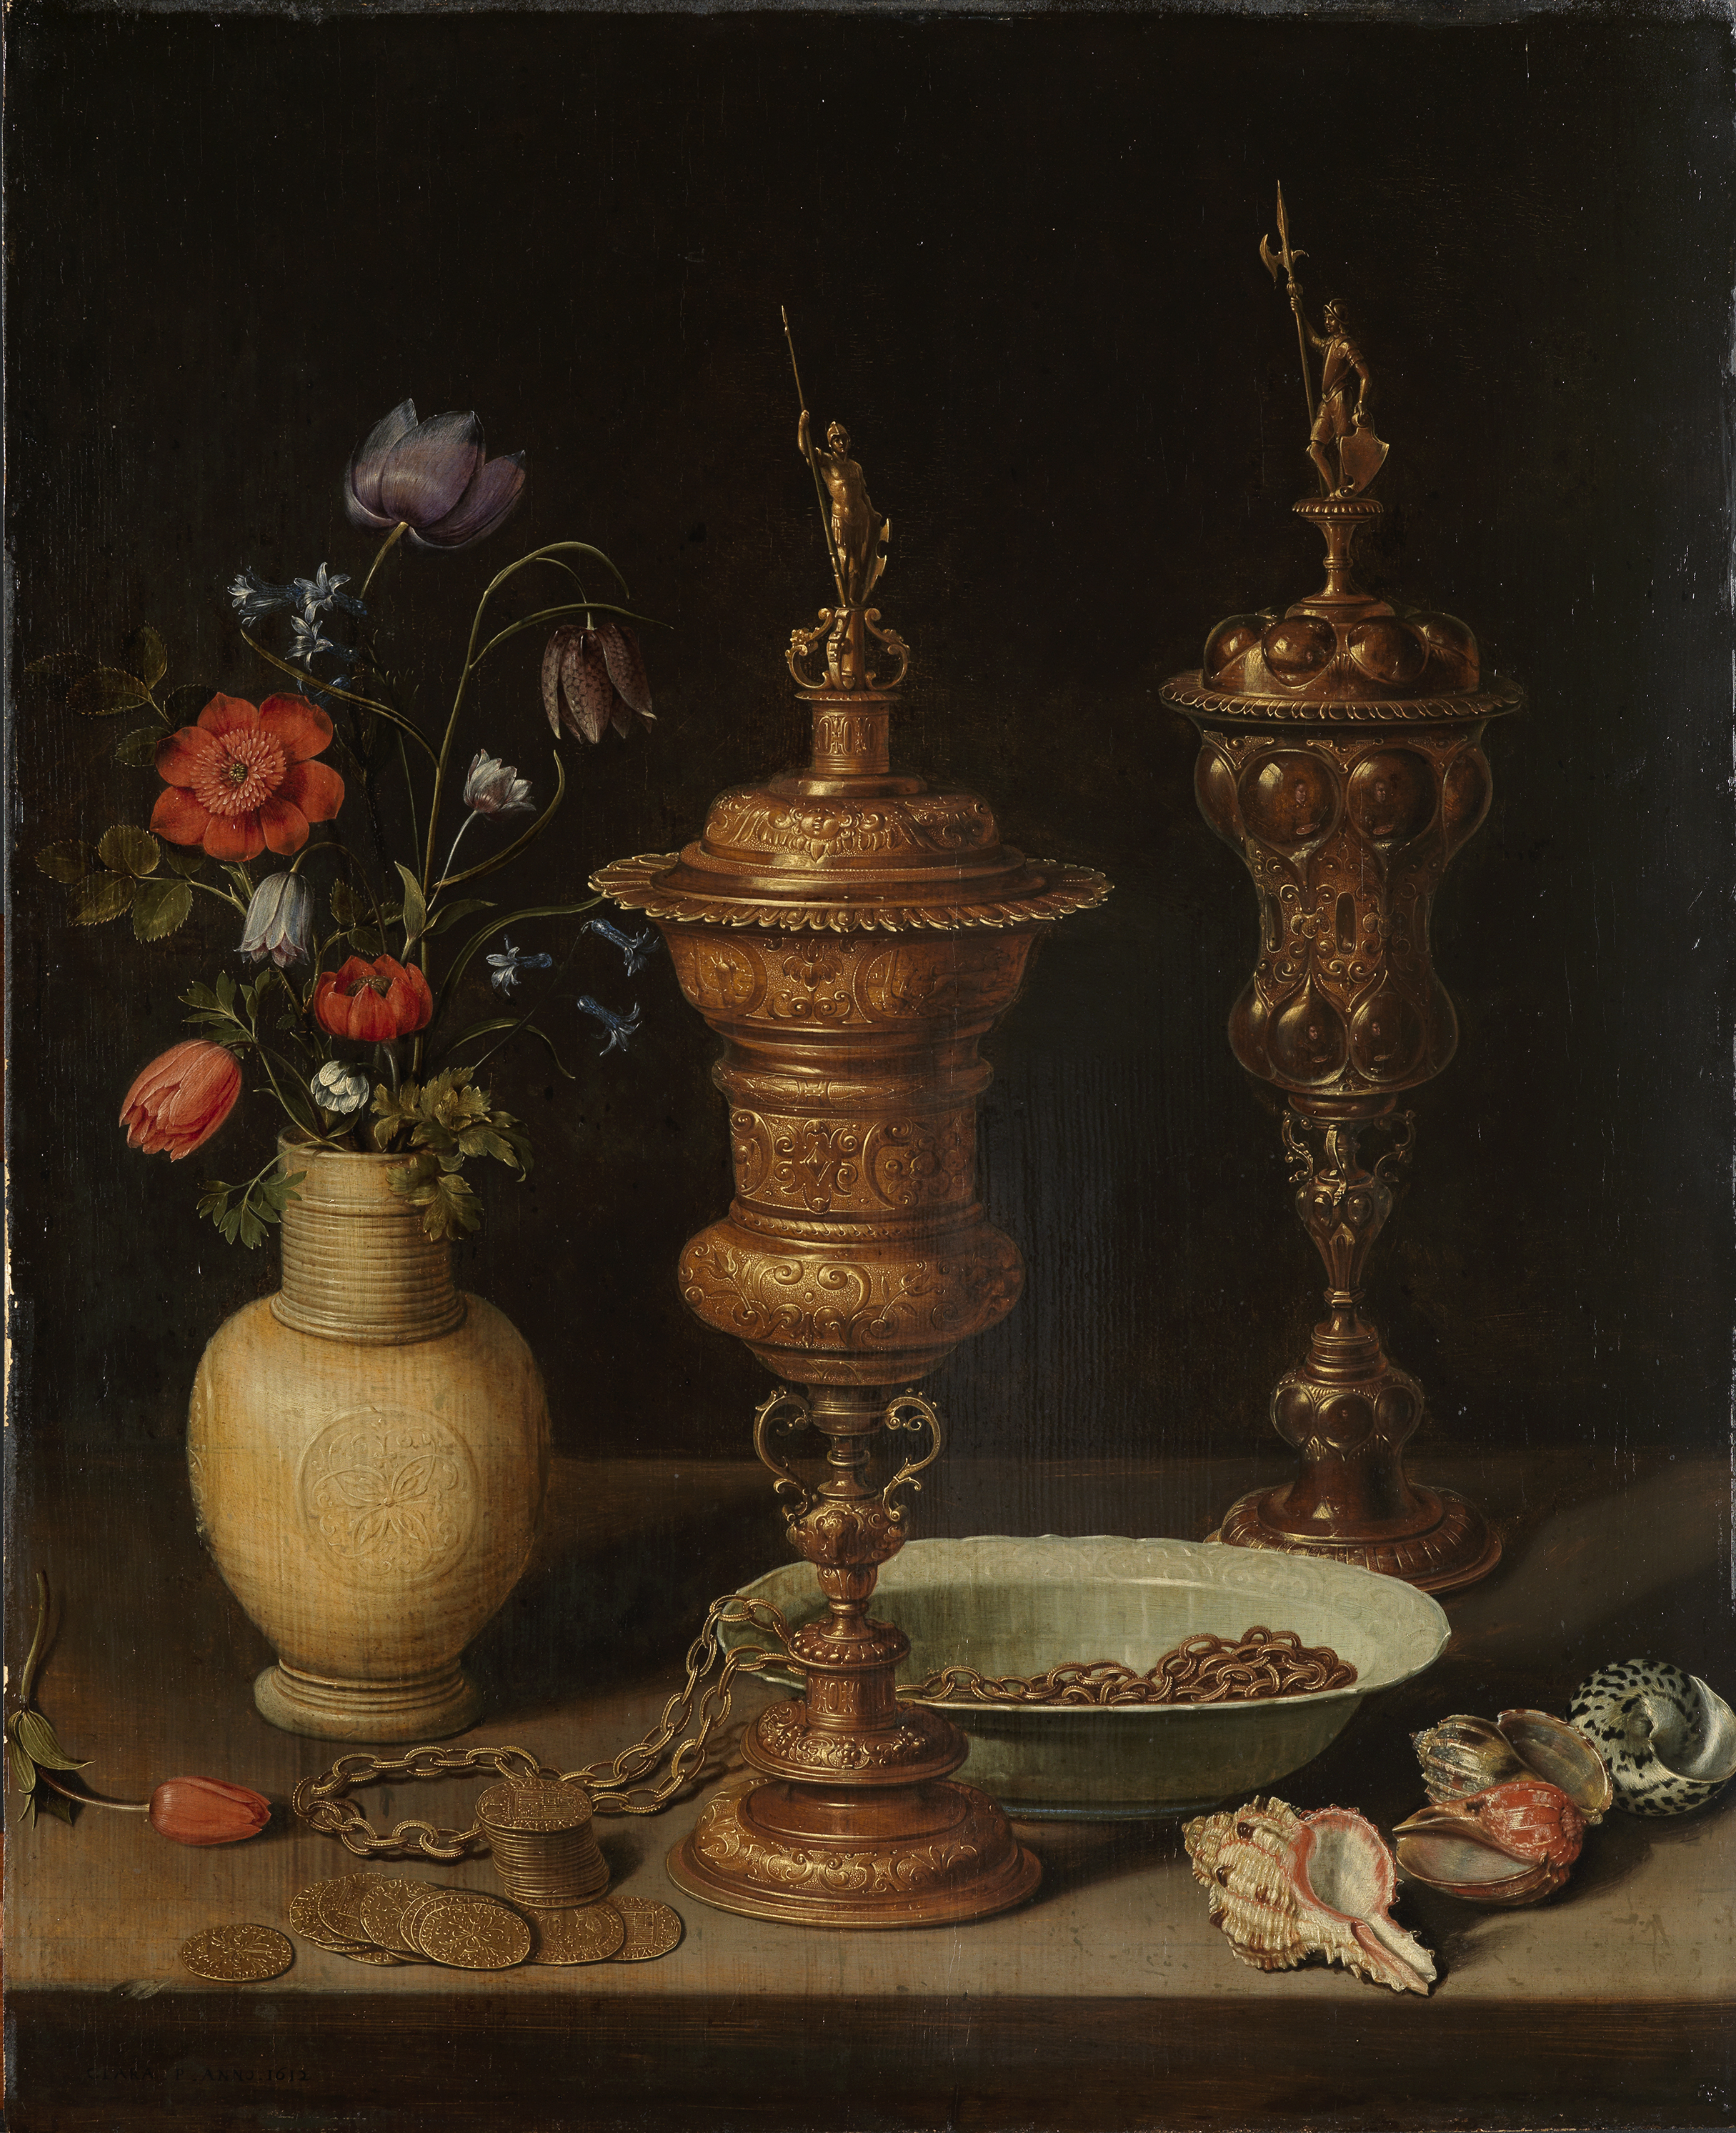 Still Life with Flowers by Clara Peeters - 1612 - 73 x 62 cm Staatliche Kunsthalle Karlsruhe